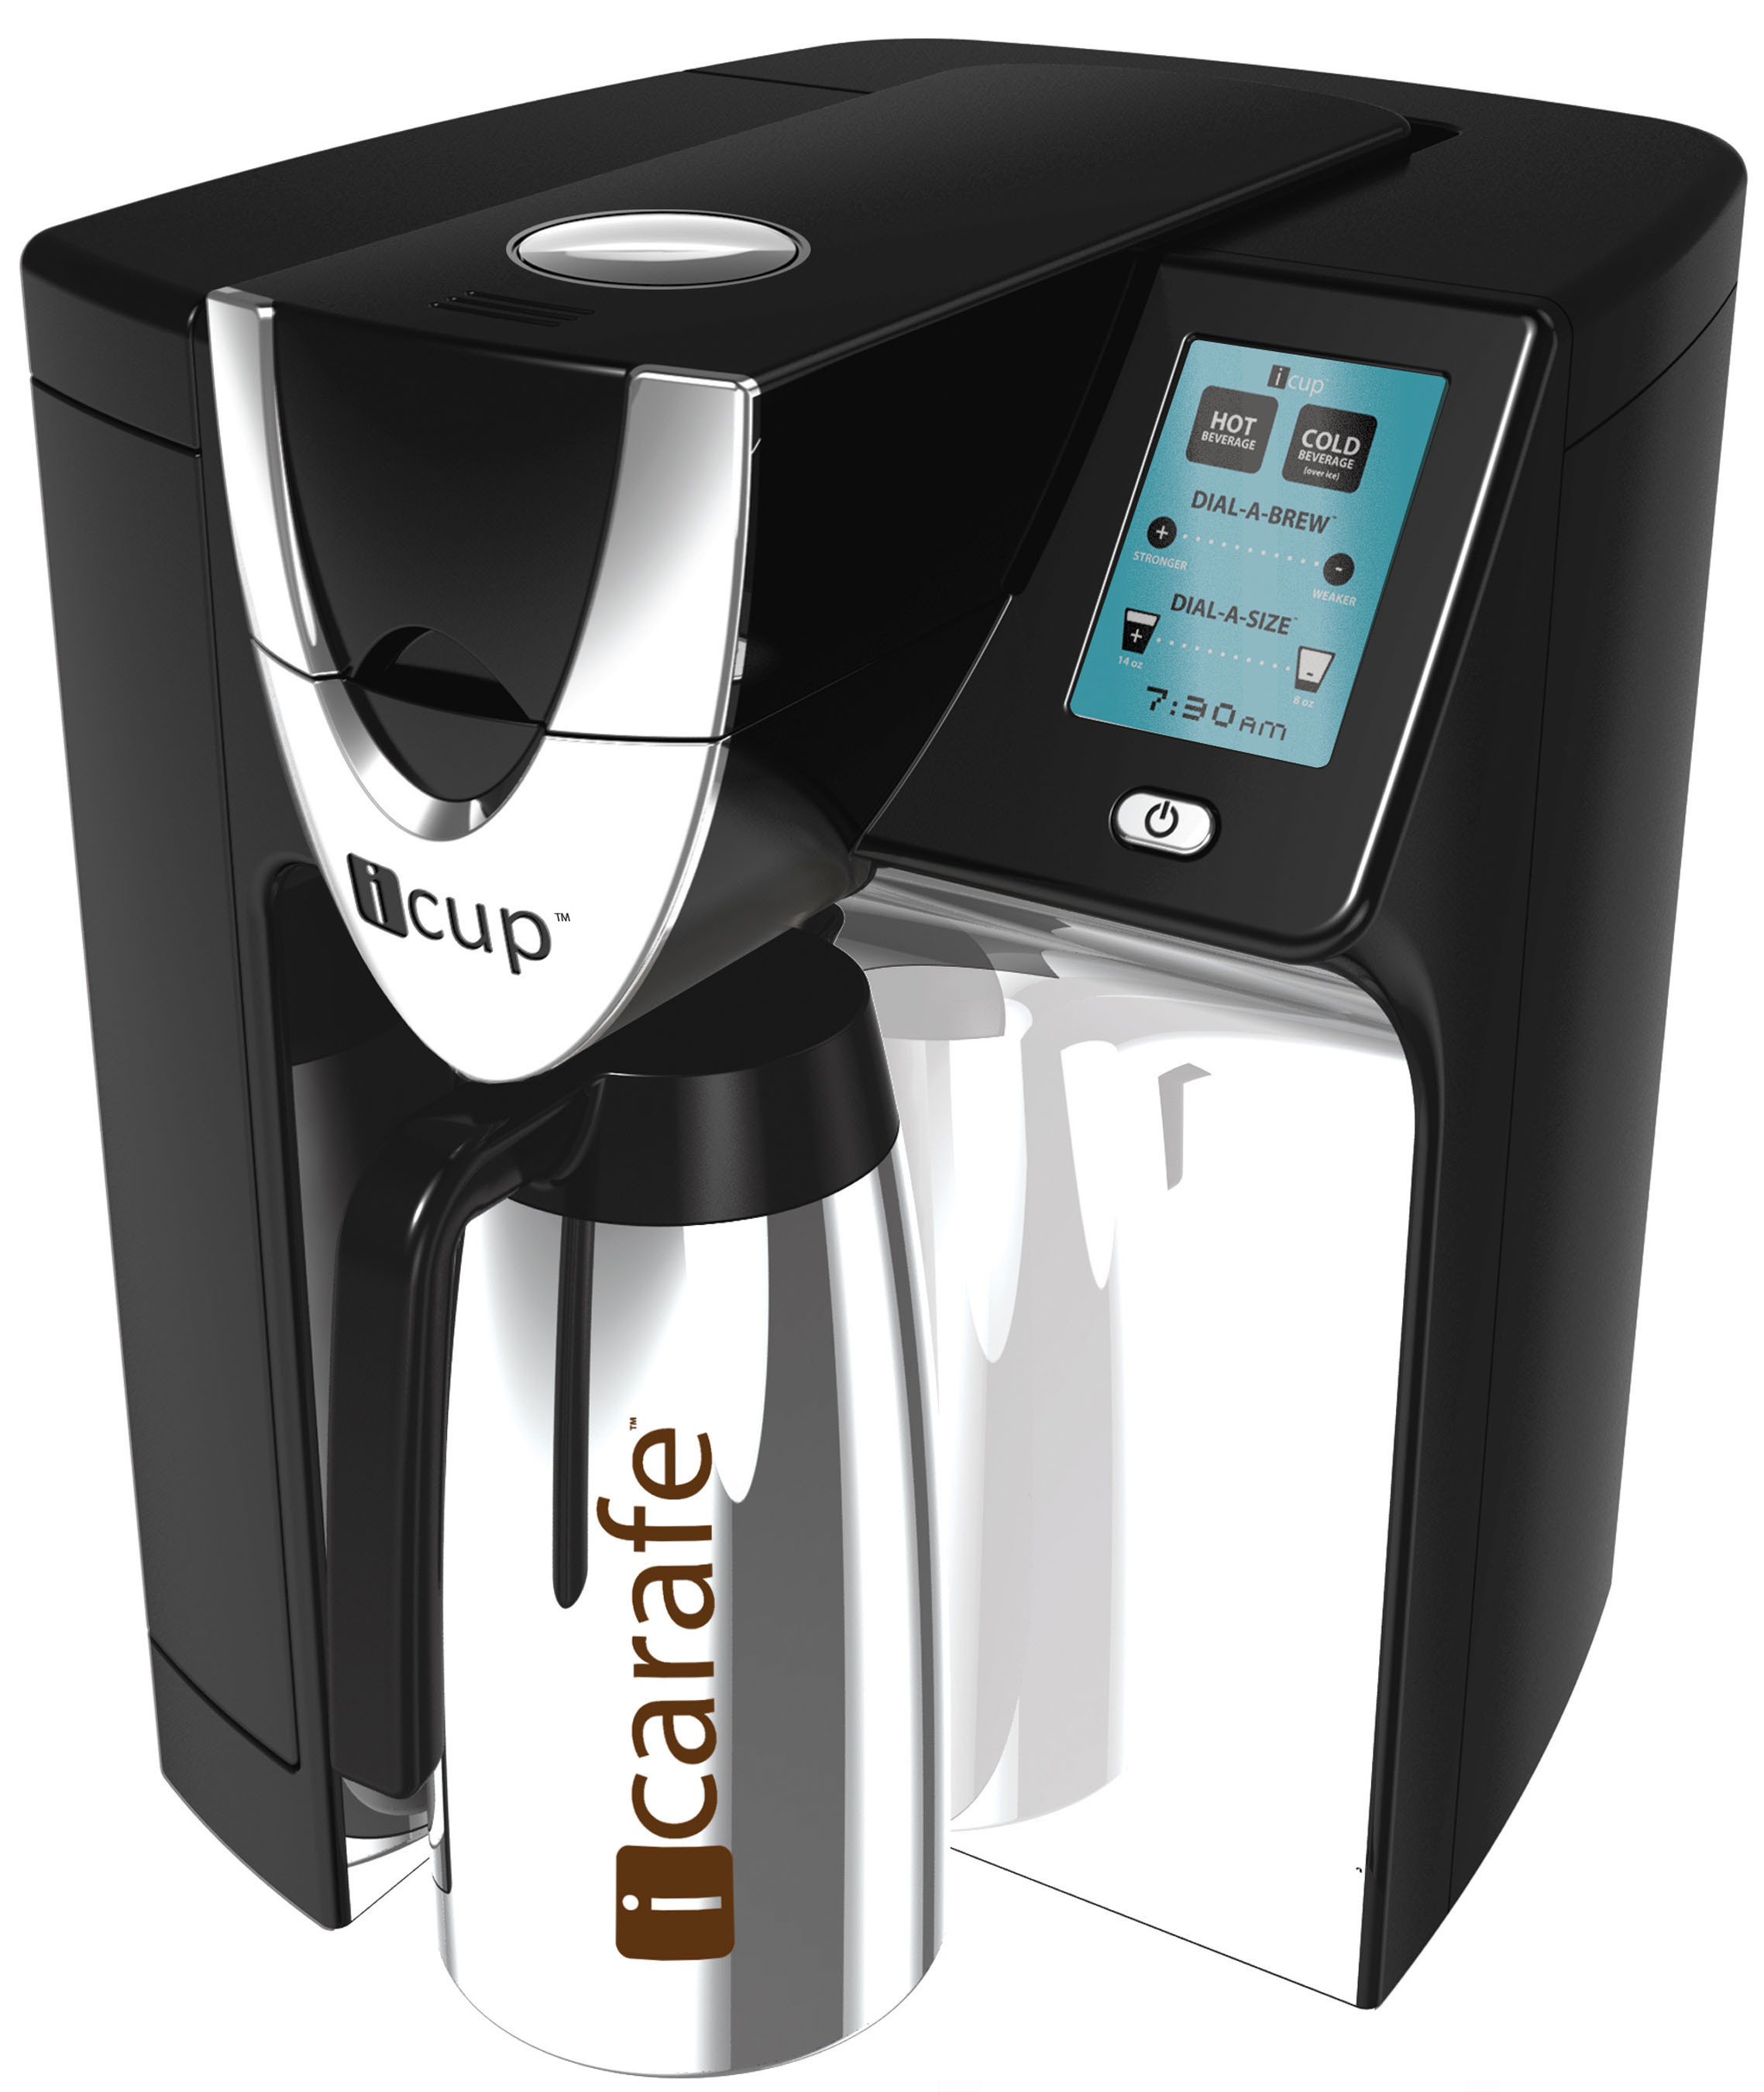 Remington iCoffee Opus Single-Serve Brewer review: A lackluster